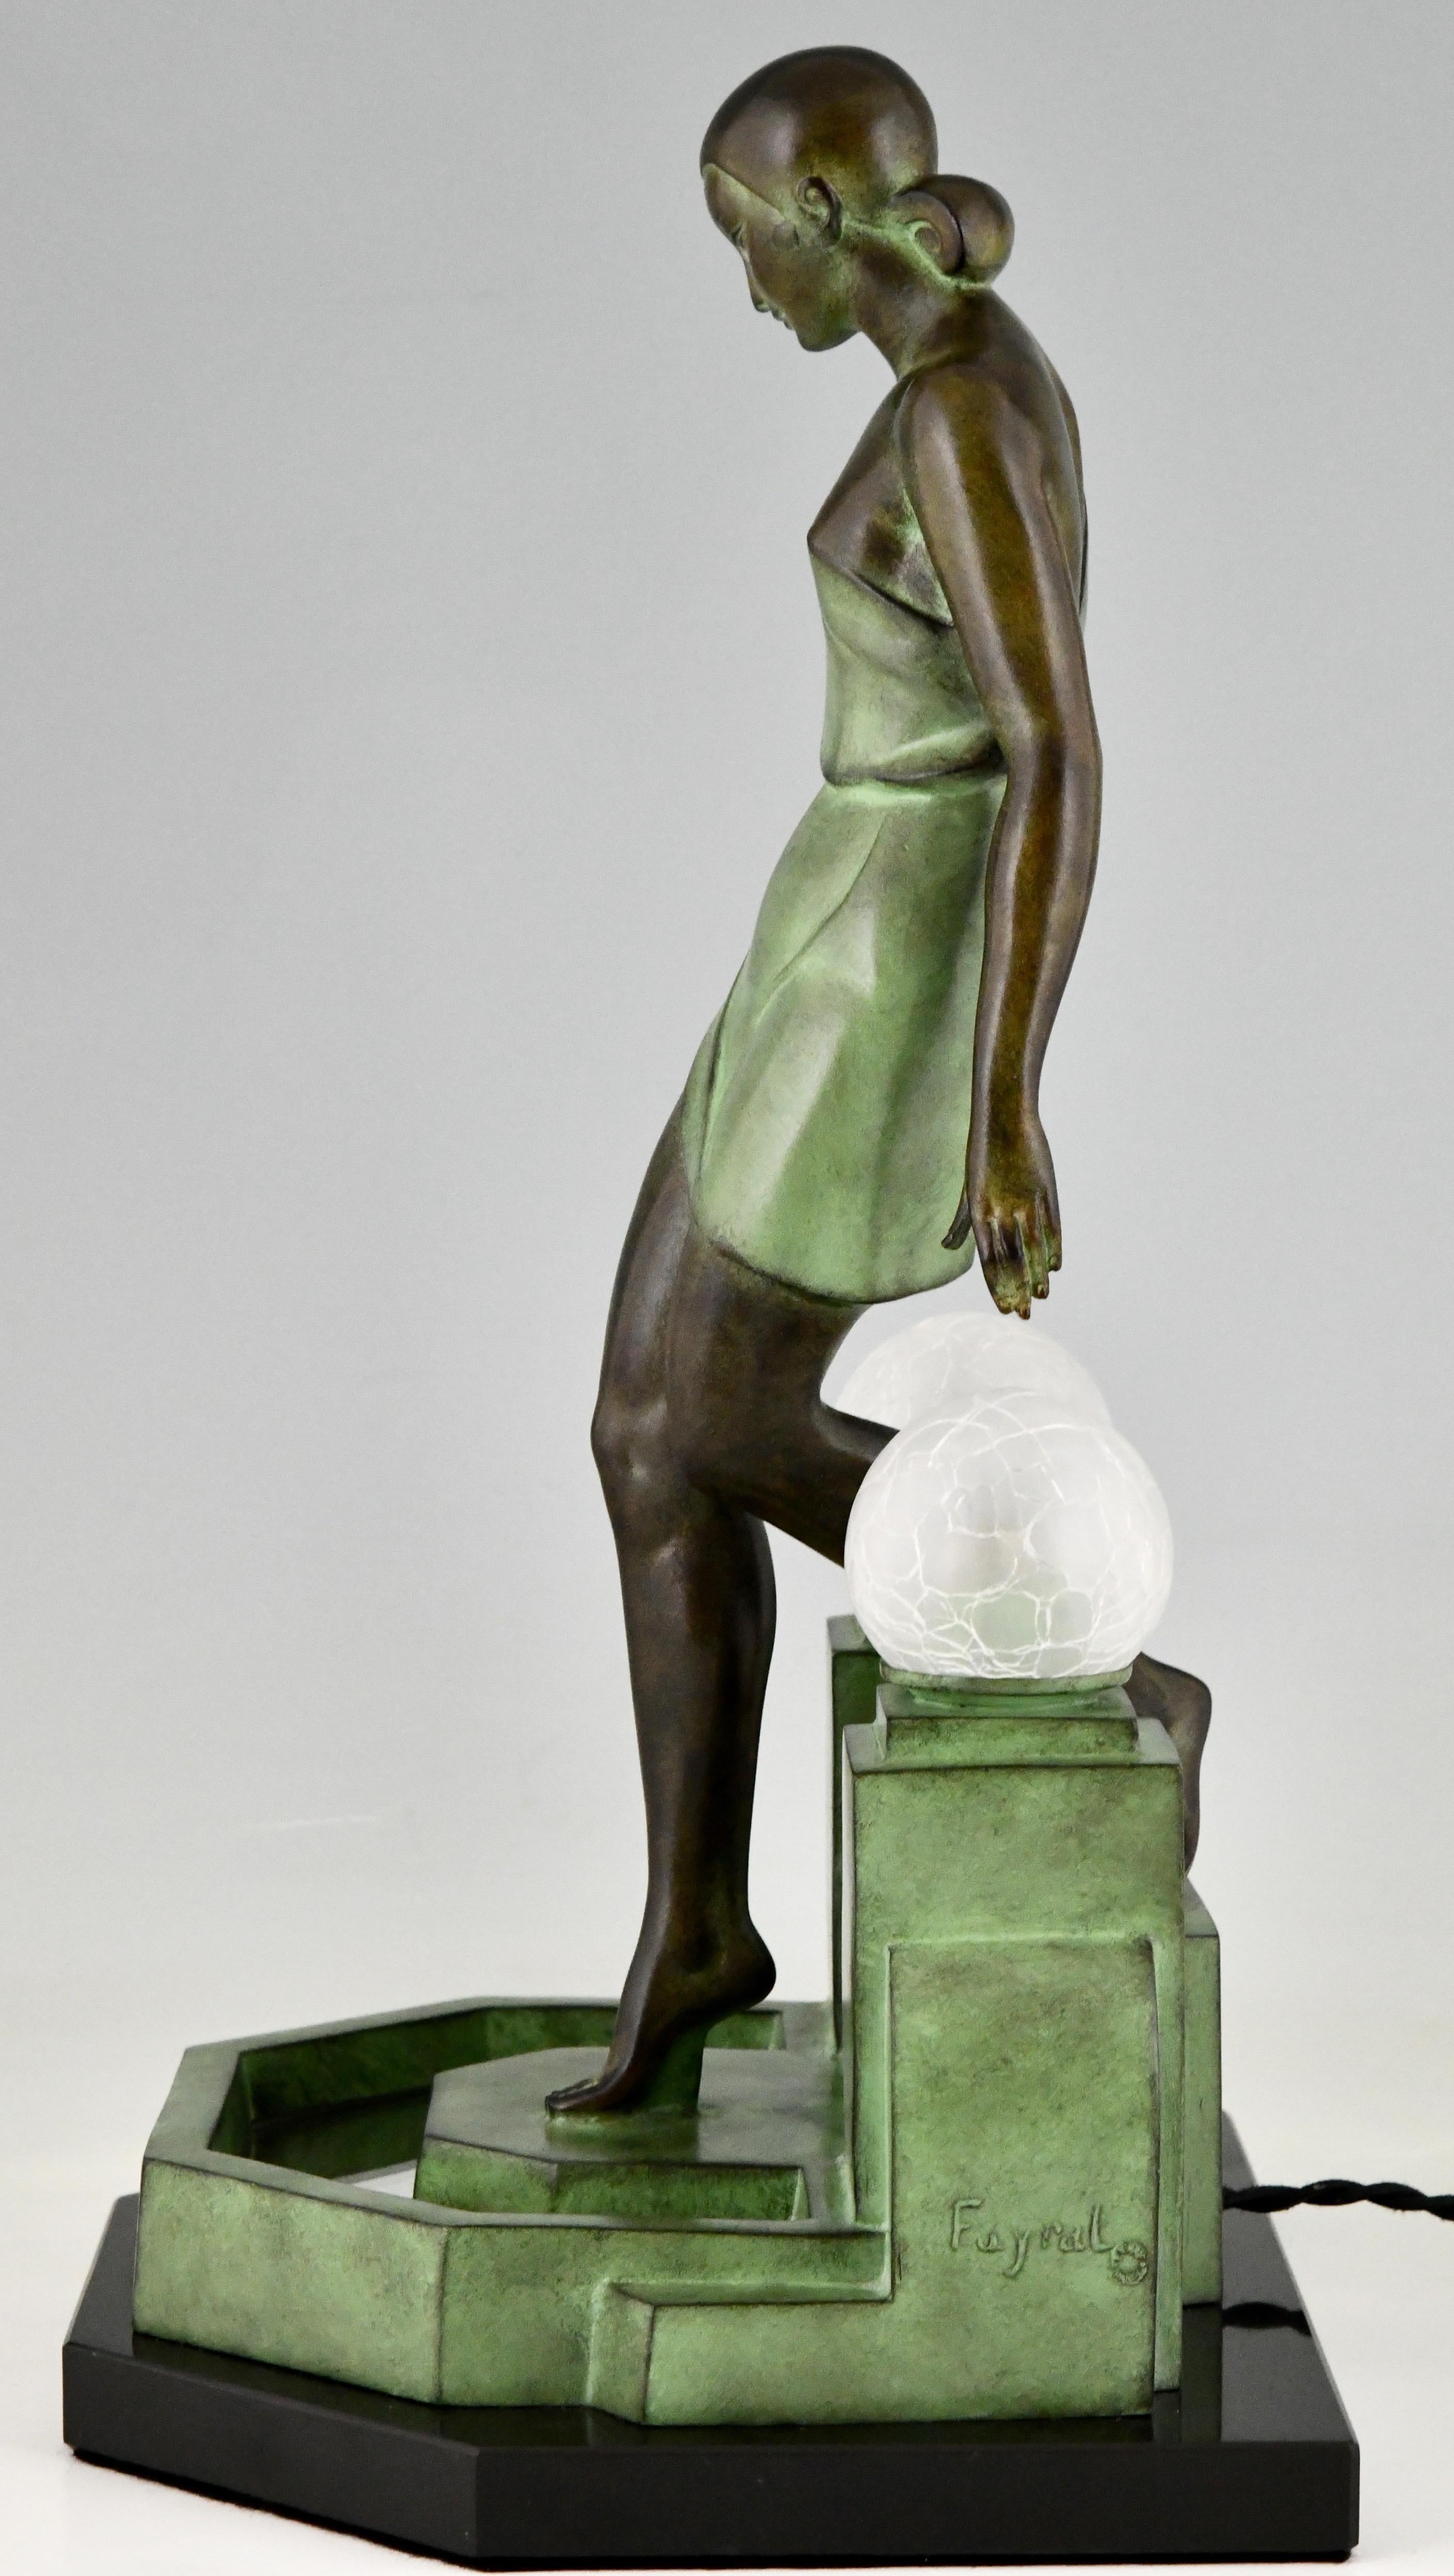 Contemporary Nausicaa Art Deco Style Lamp Lady at a Fountain by Fayral for Max Le Verrier